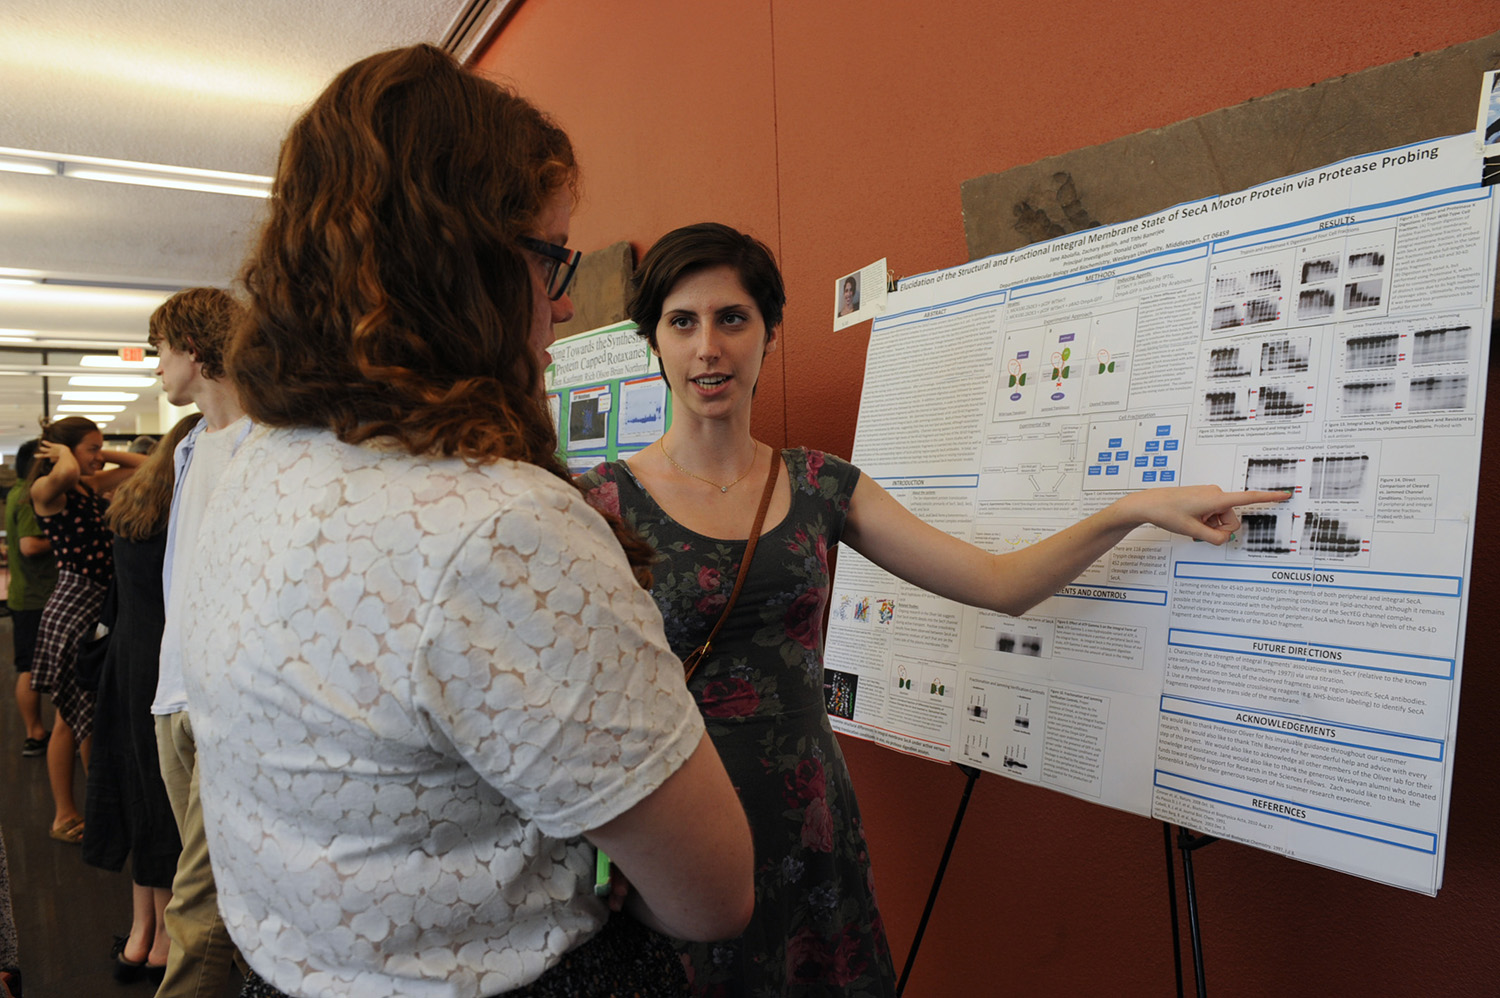 Jane Abolafia ’16 discusses her poster, "Elucidation of the Structural and Functional Integral Membrane State of SecA  Motor Protein via Protease Probing." Zachary Breslin ’16 also assisted with the research. Their adviser is  Donald Oliver, Daniel Ayres professor of biology, professor of molecular biology and biochemistry.